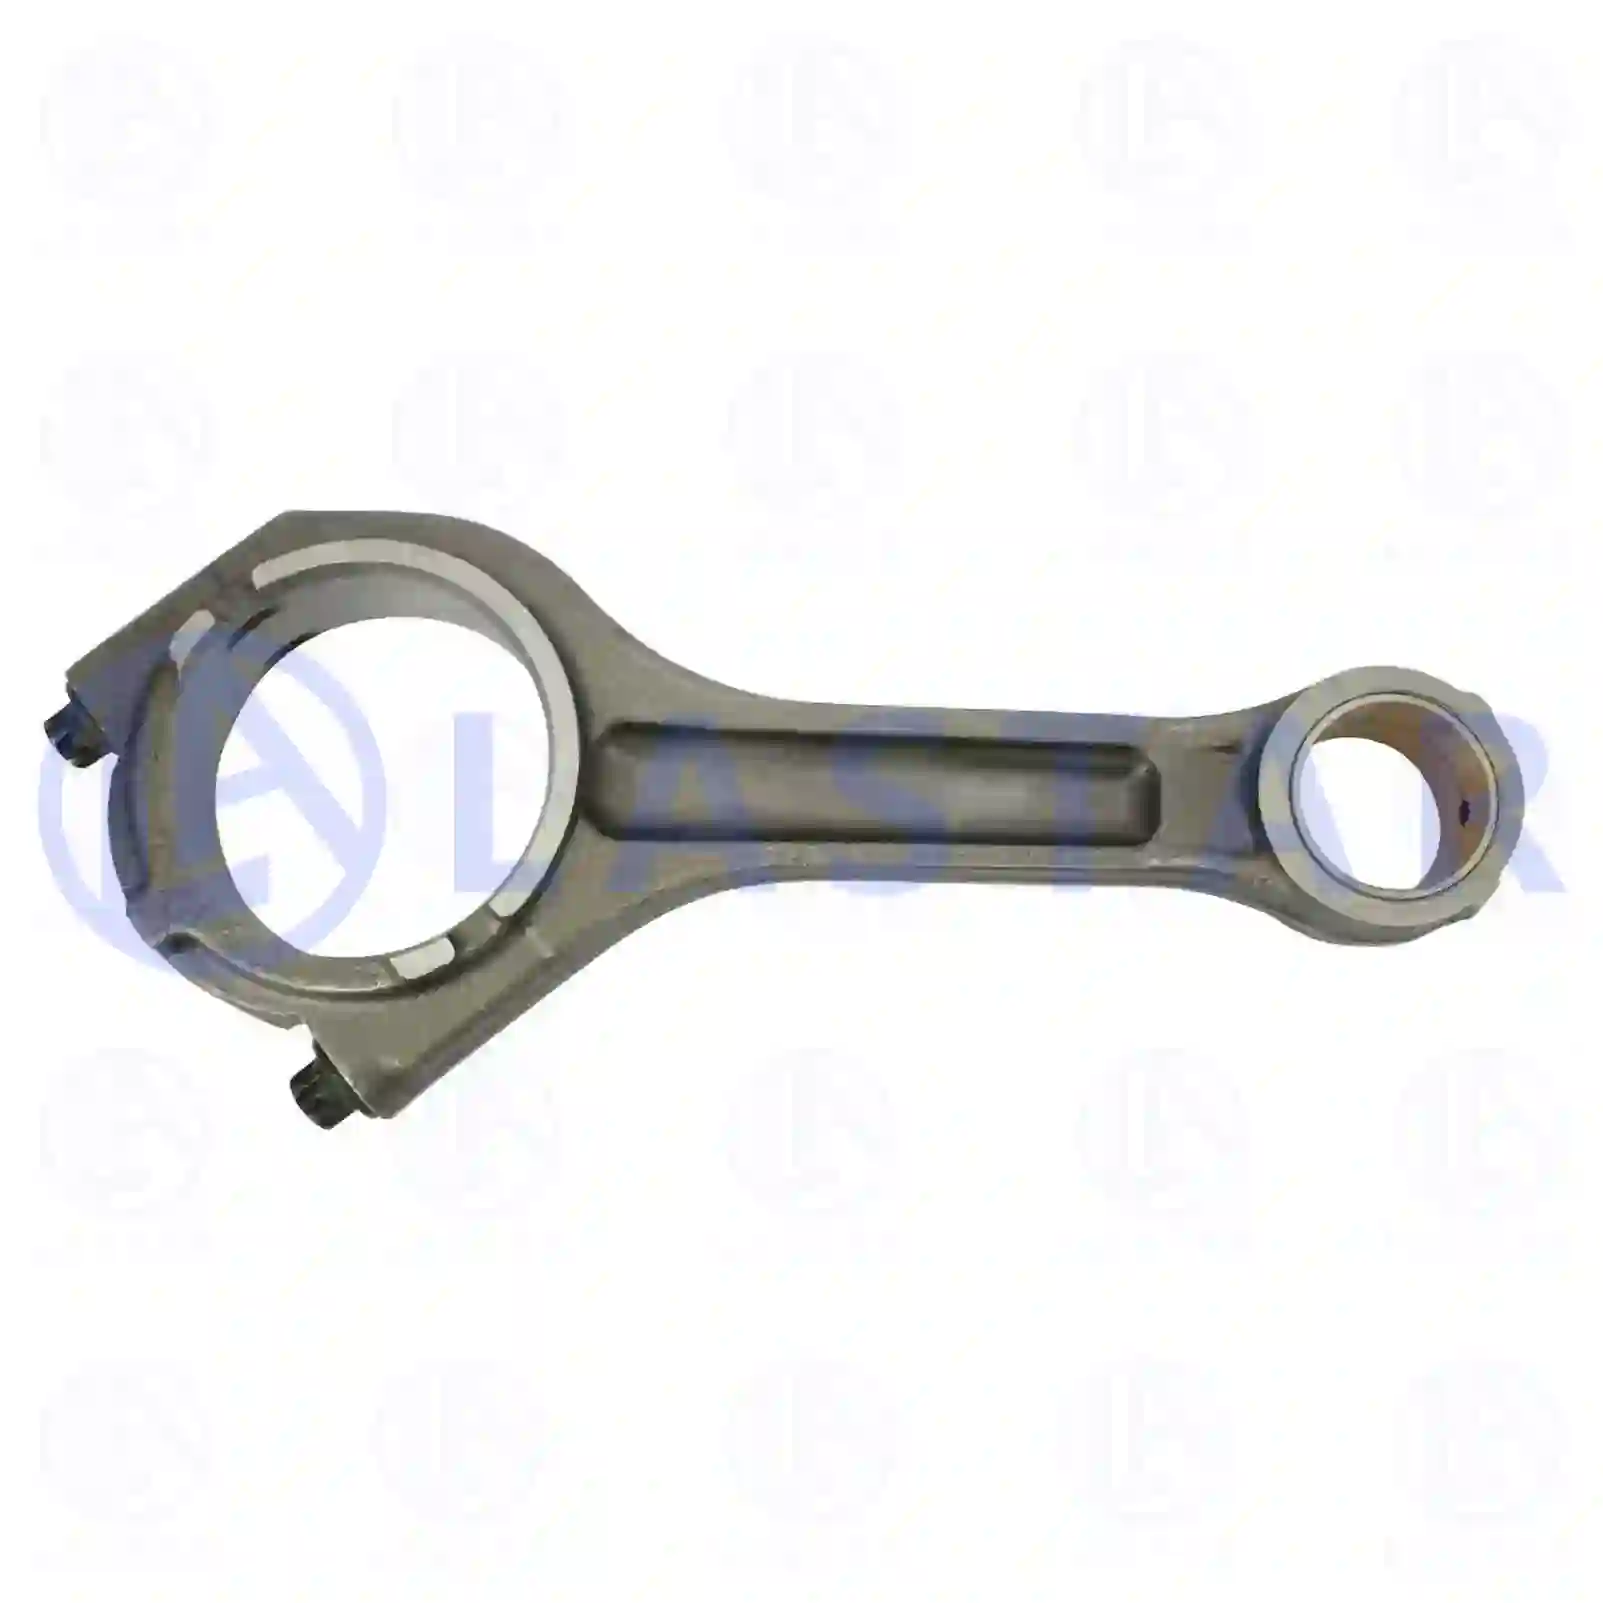 Connecting Rod              Connecting rod, straight head, la no: 77704408 ,  oem no:51024006027, 51024006033, 51024006035, 51024006043, 51024006044, 51024010209, 51024016192 Lastar Spare Part | Truck Spare Parts, Auotomotive Spare Parts